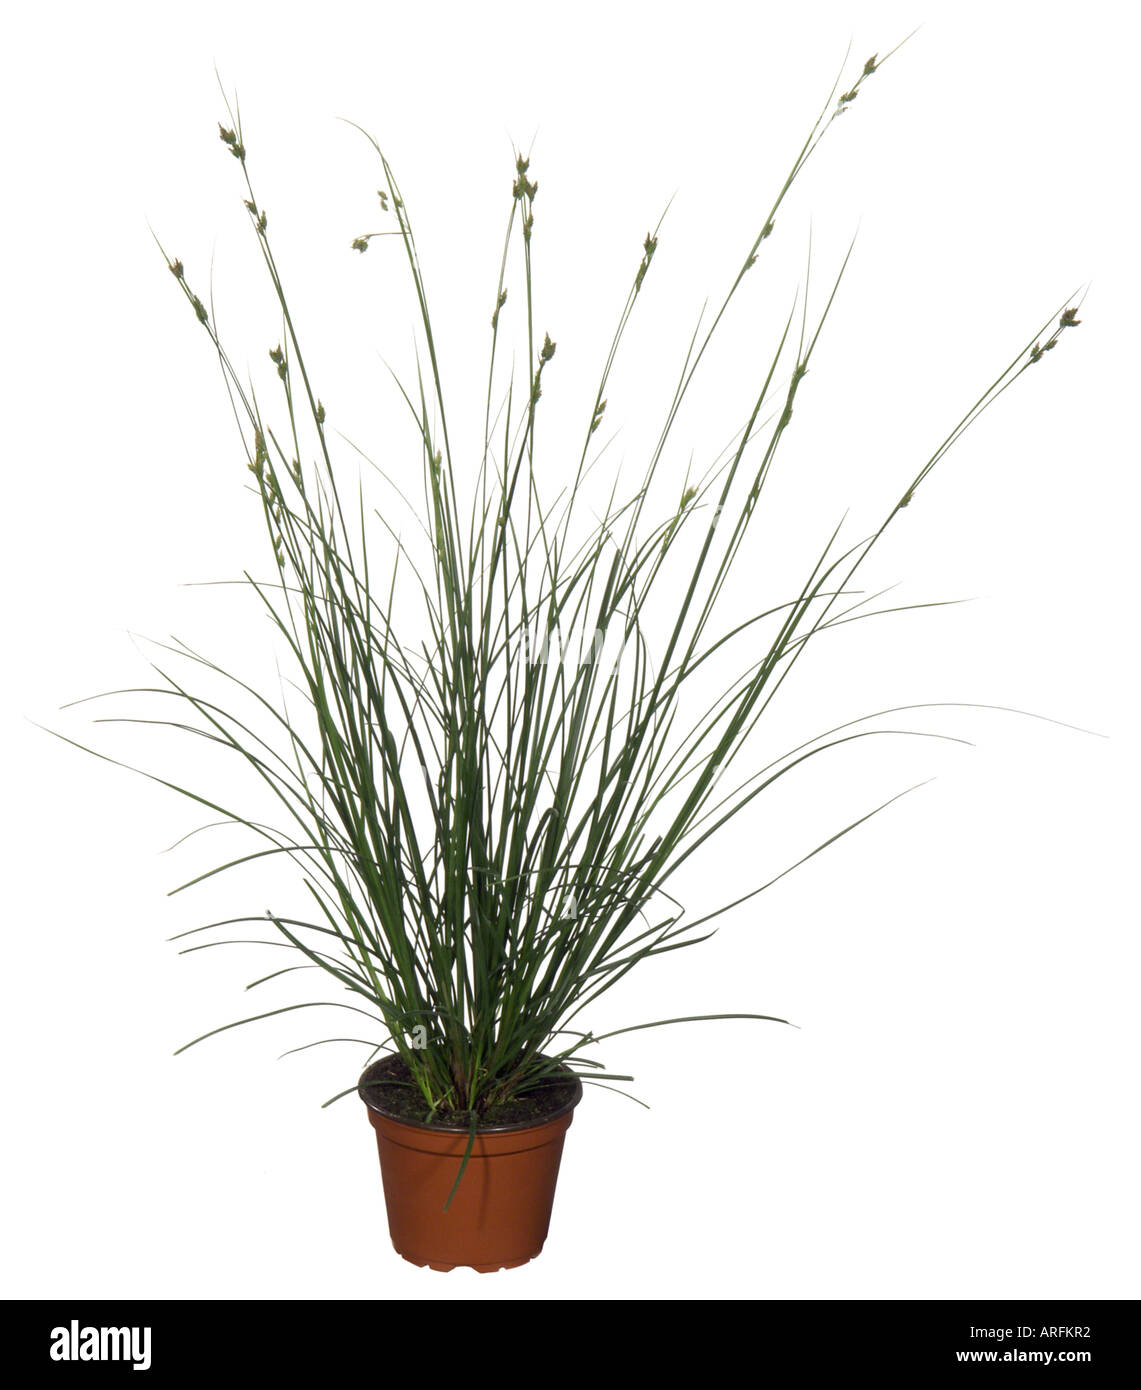 greater brown sedge (Carex brunnea), potted plant Stock Photo